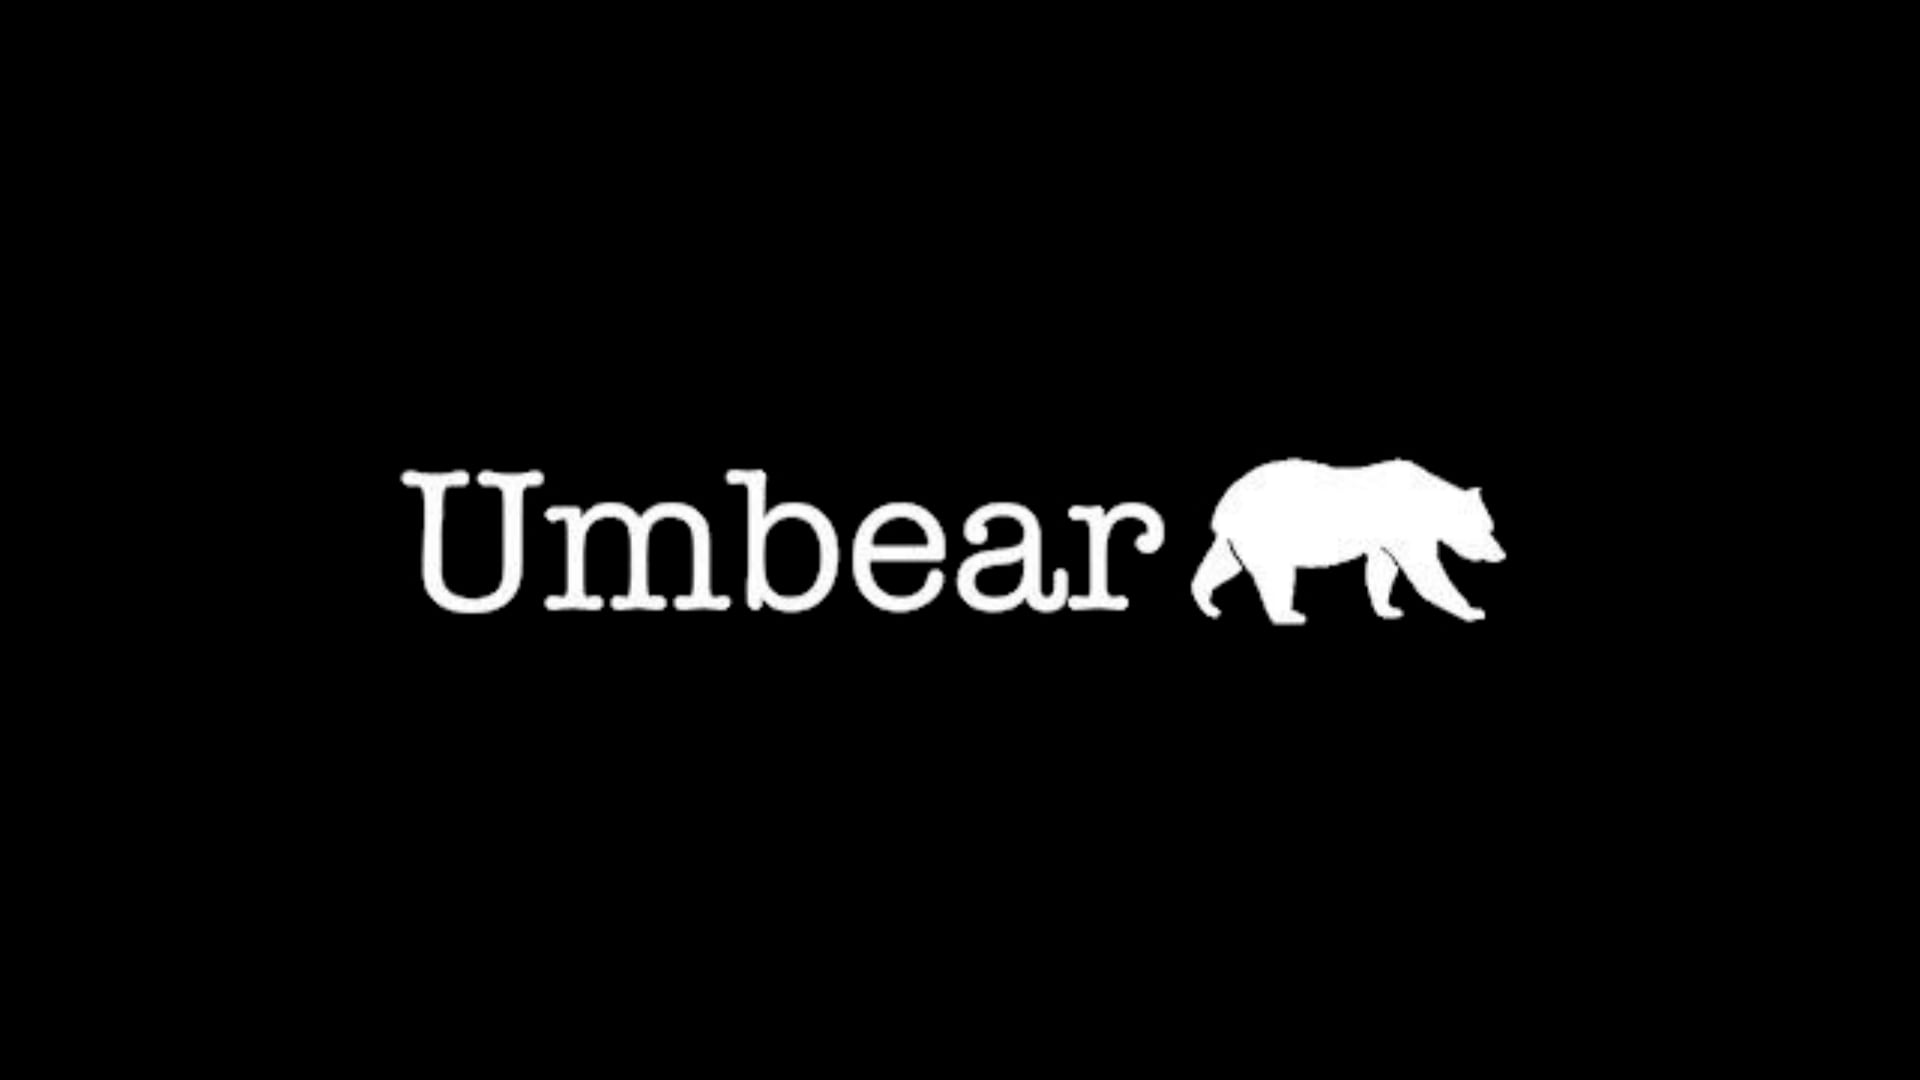 Load video: Umbear Umbrella safe auto open and close umbrella - max water repellency and ratchet safety shaft demonstration